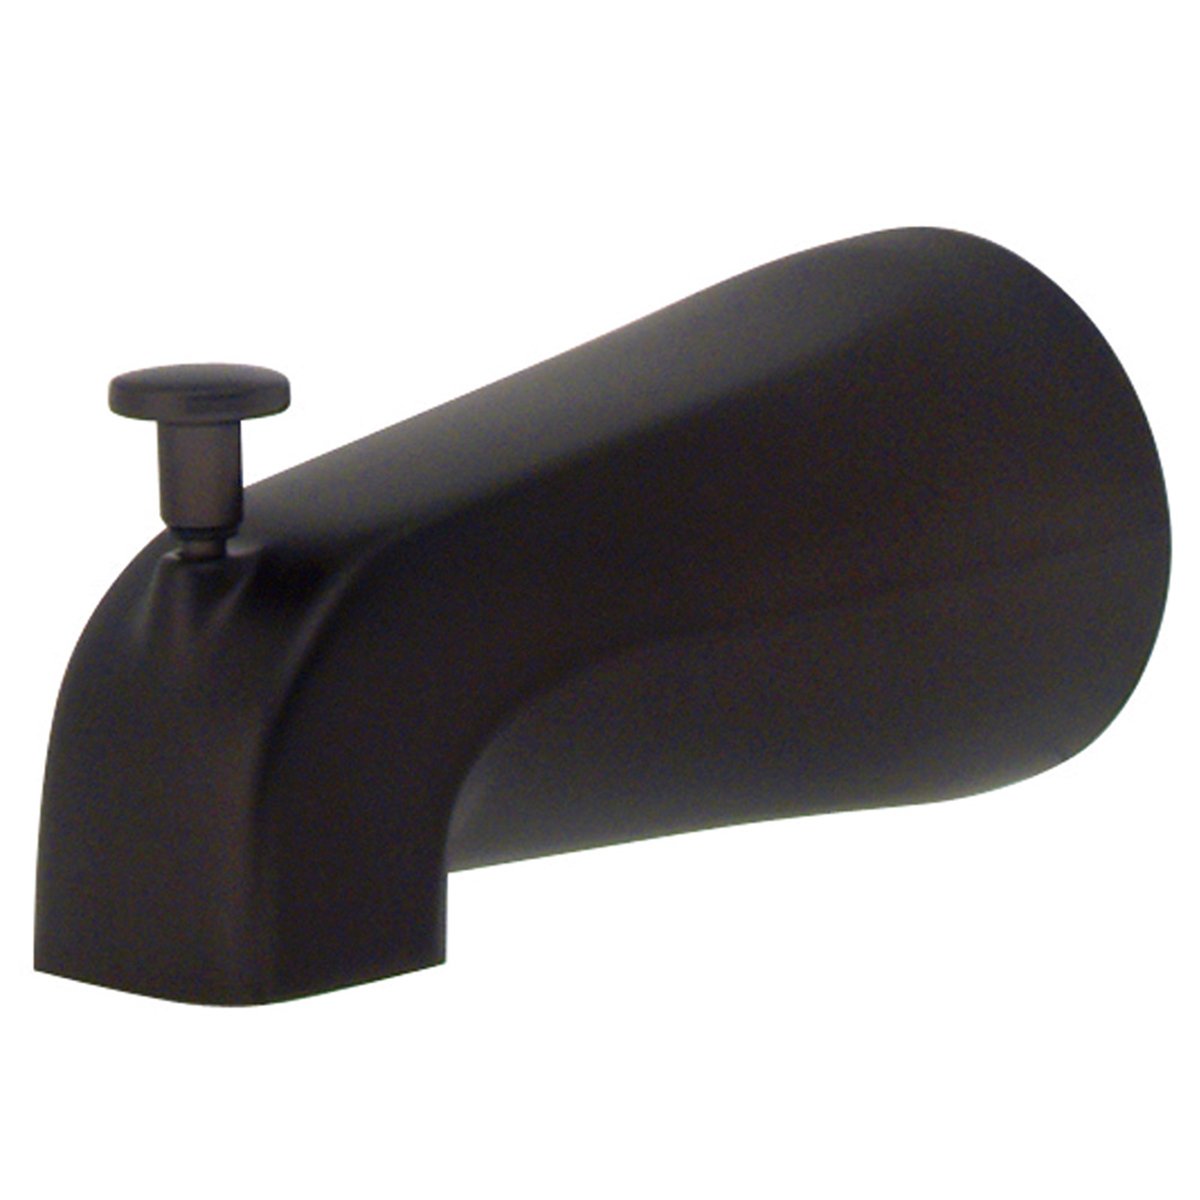 Kingston Brass Made to Match 5" Zinc Diverter Tub Spout-Bathroom Accessories-Free Shipping-Directsinks.